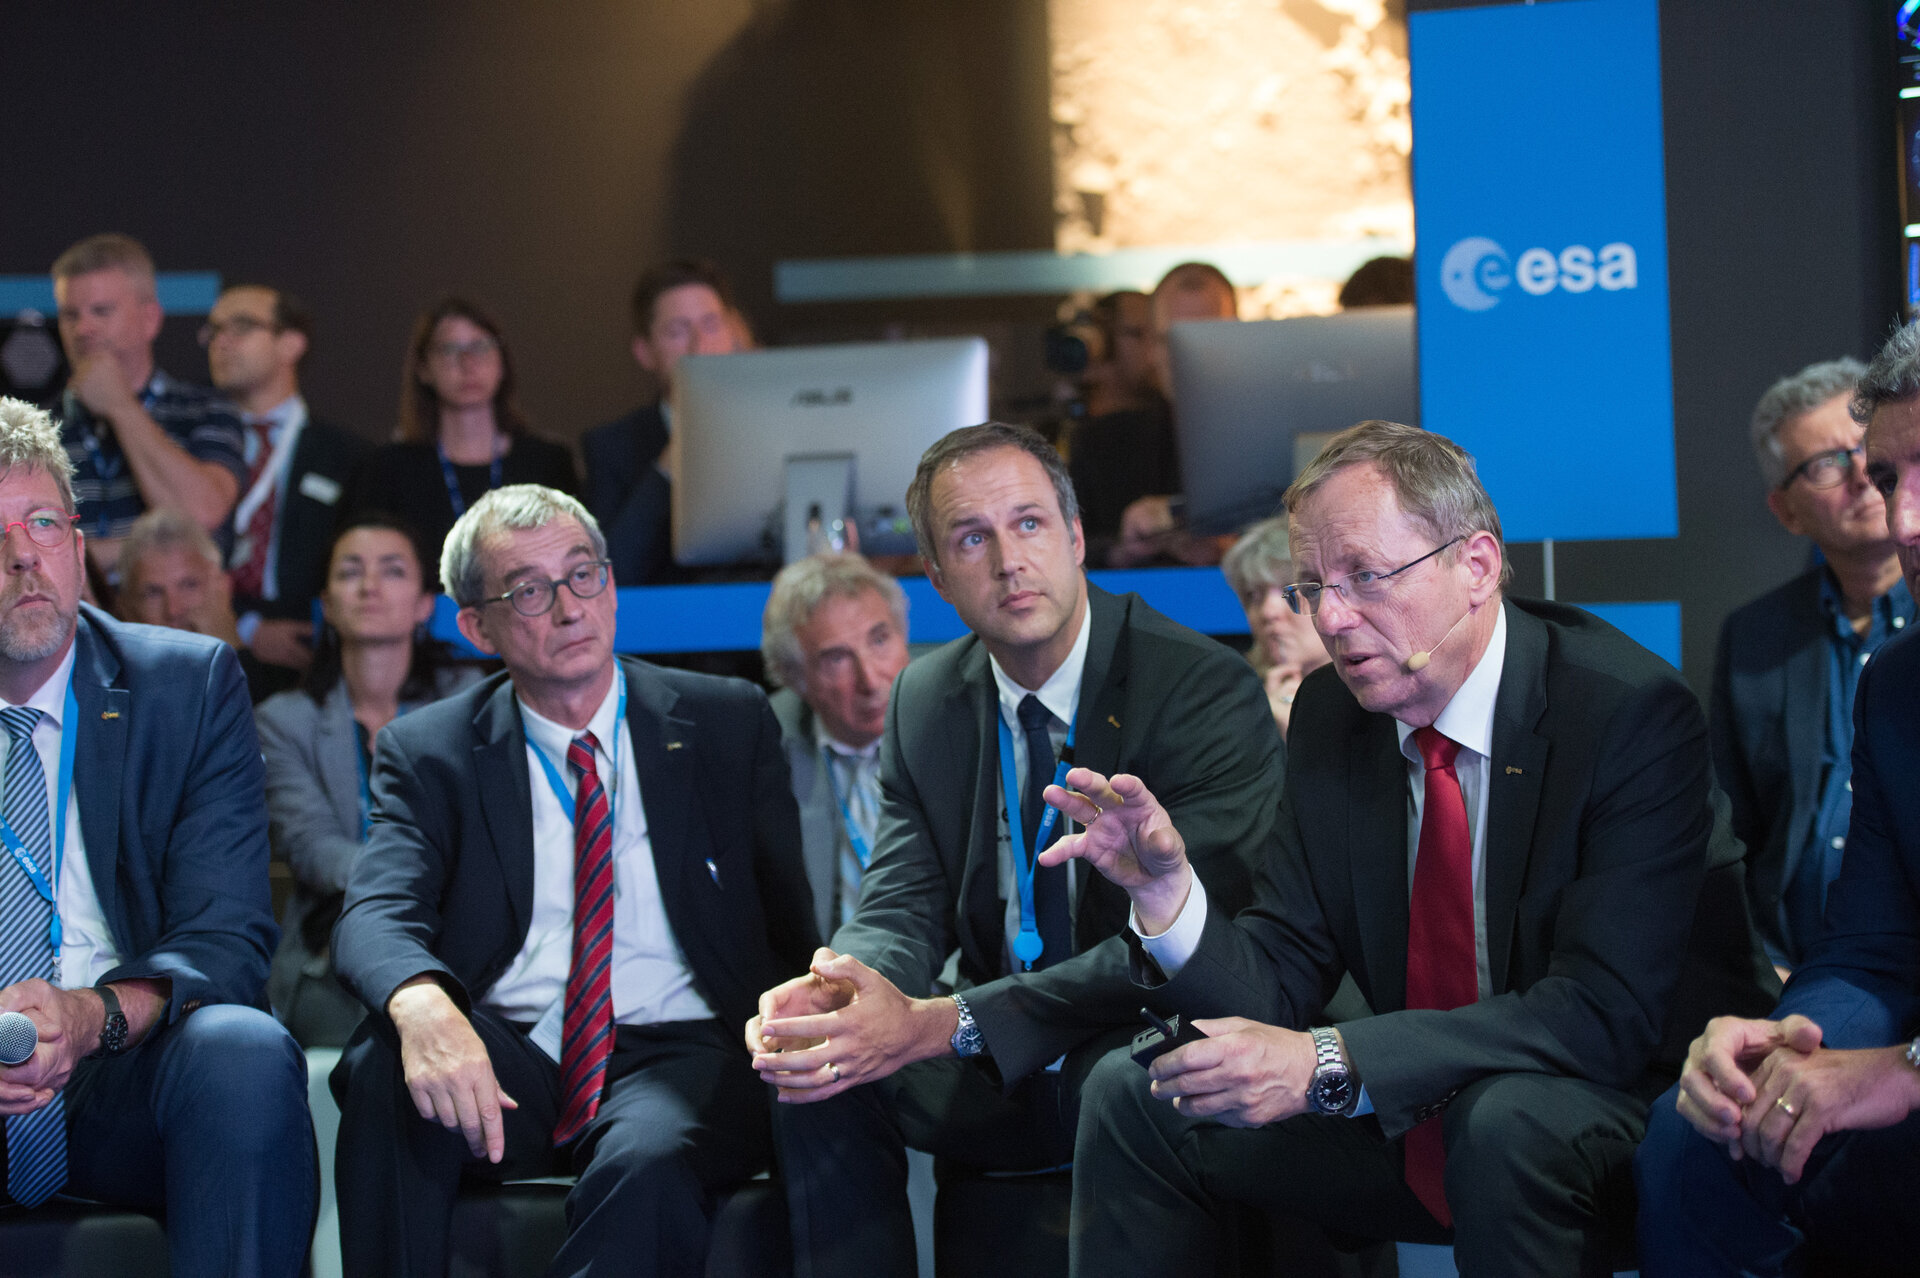 Jan Wörner during an interaction with media on ‘Space 4.0’